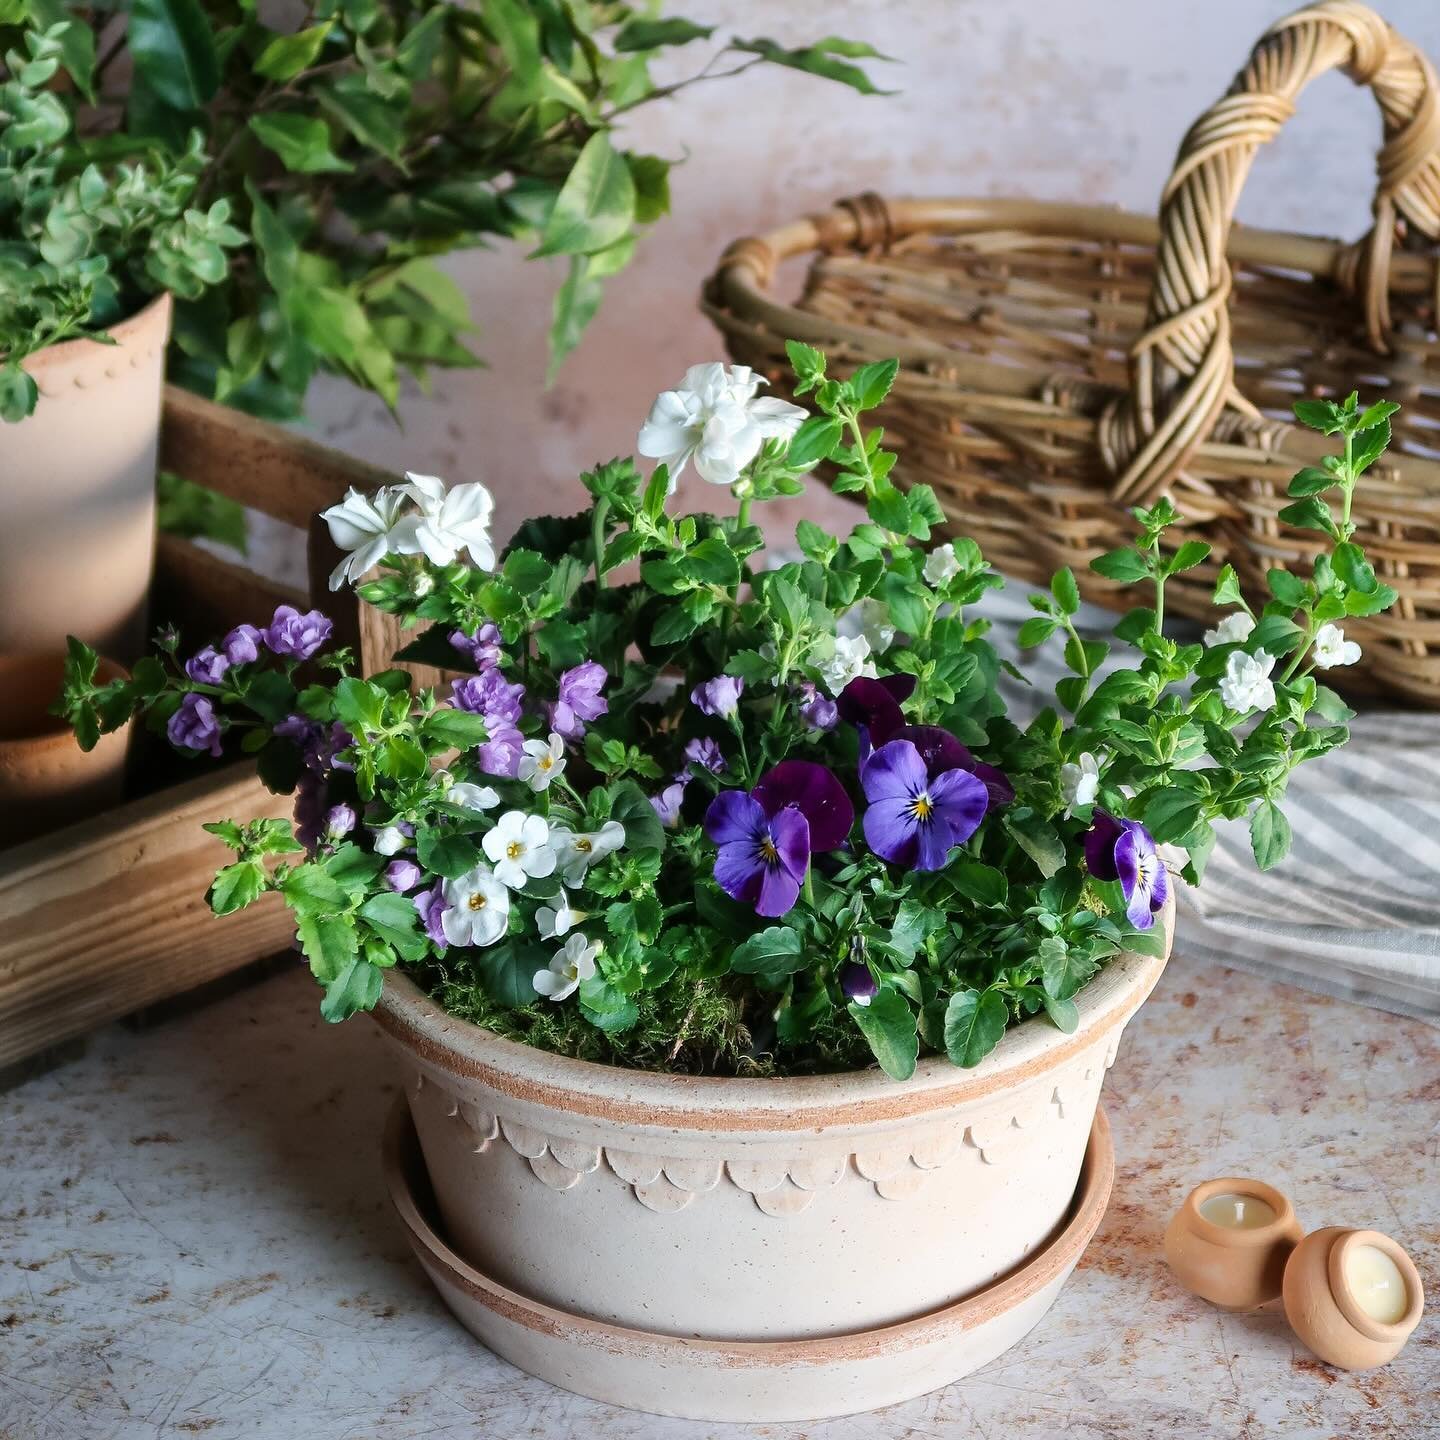 The May Kits 🌱 are now available to order. This collection is full of early summer florals in beautiful tones of white, lilac, blush and purple. There are trailing bacopas, scented culinary herbs, delicate violas &amp; botanical geraniums - all styl